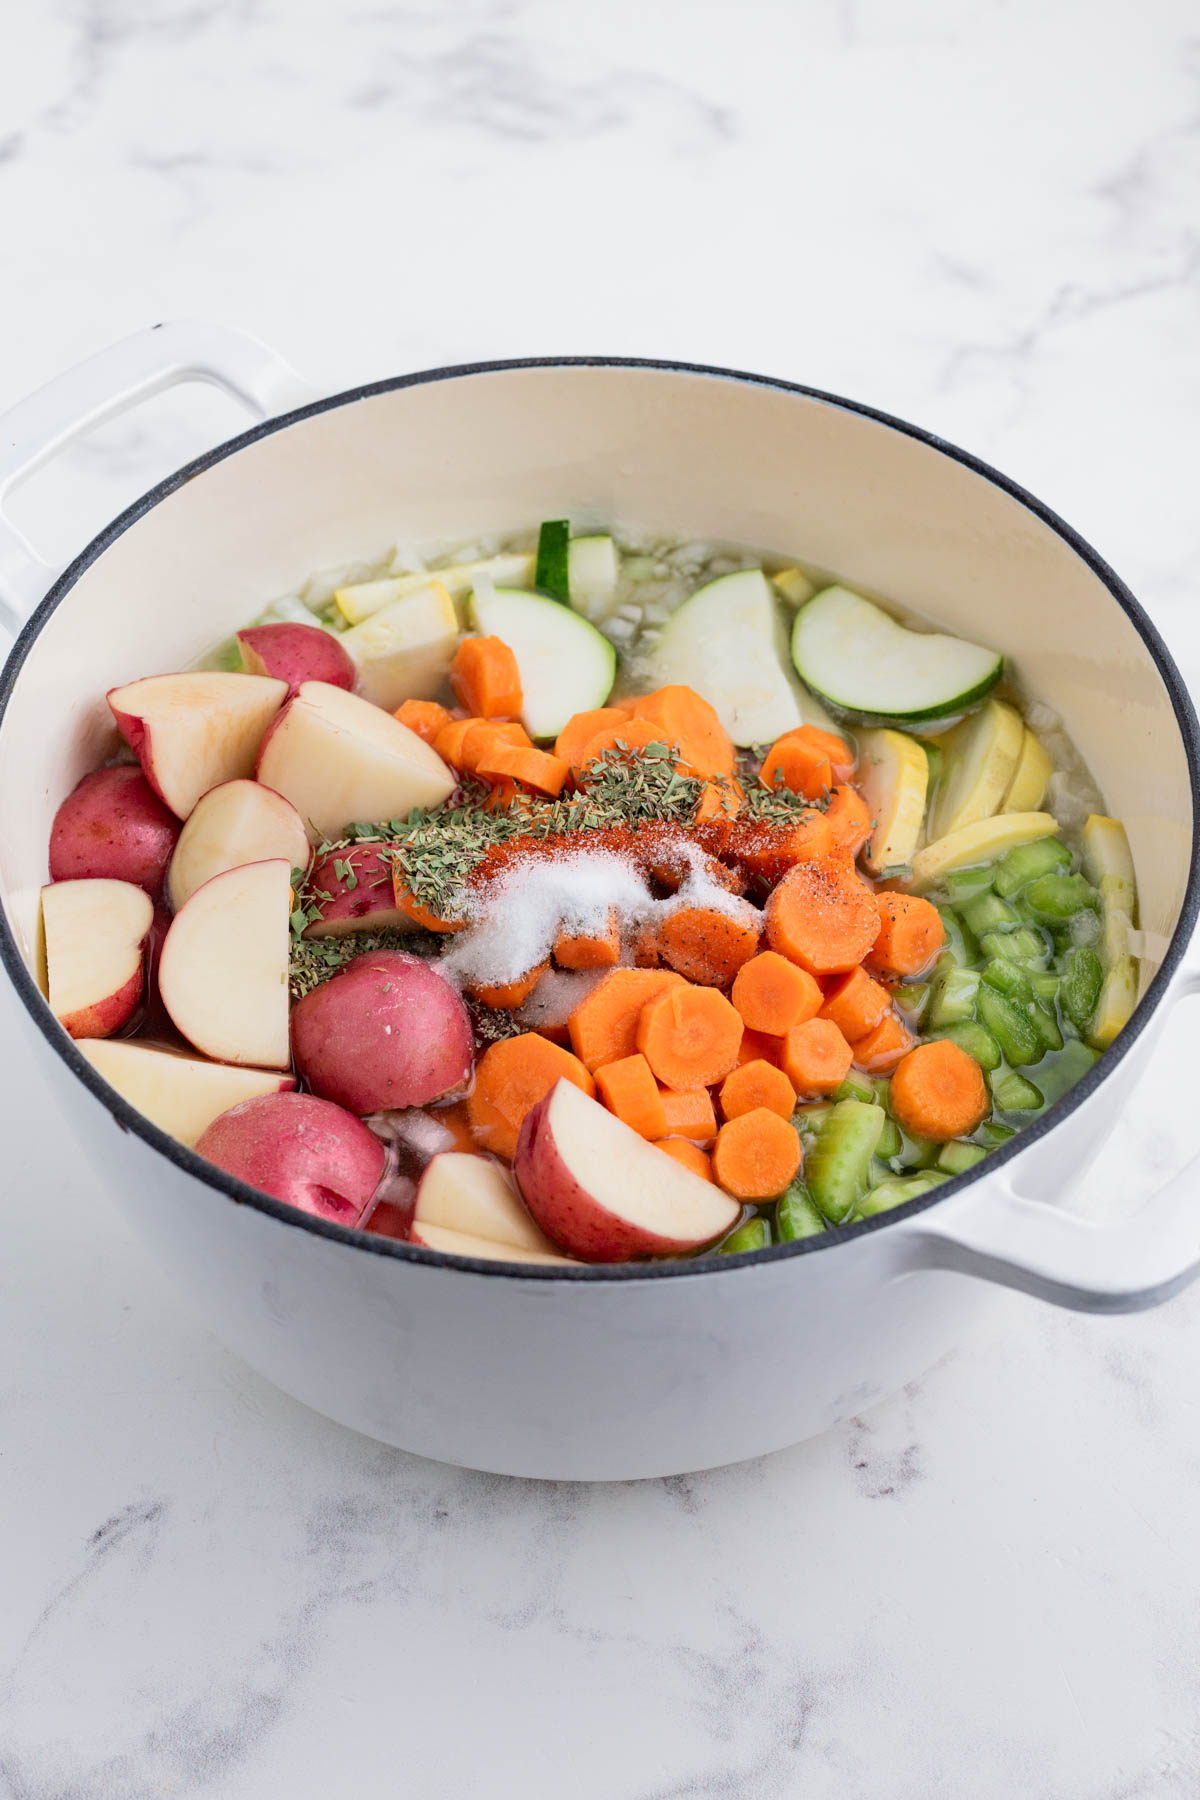 The veggies are added to the pot with broth and onions.